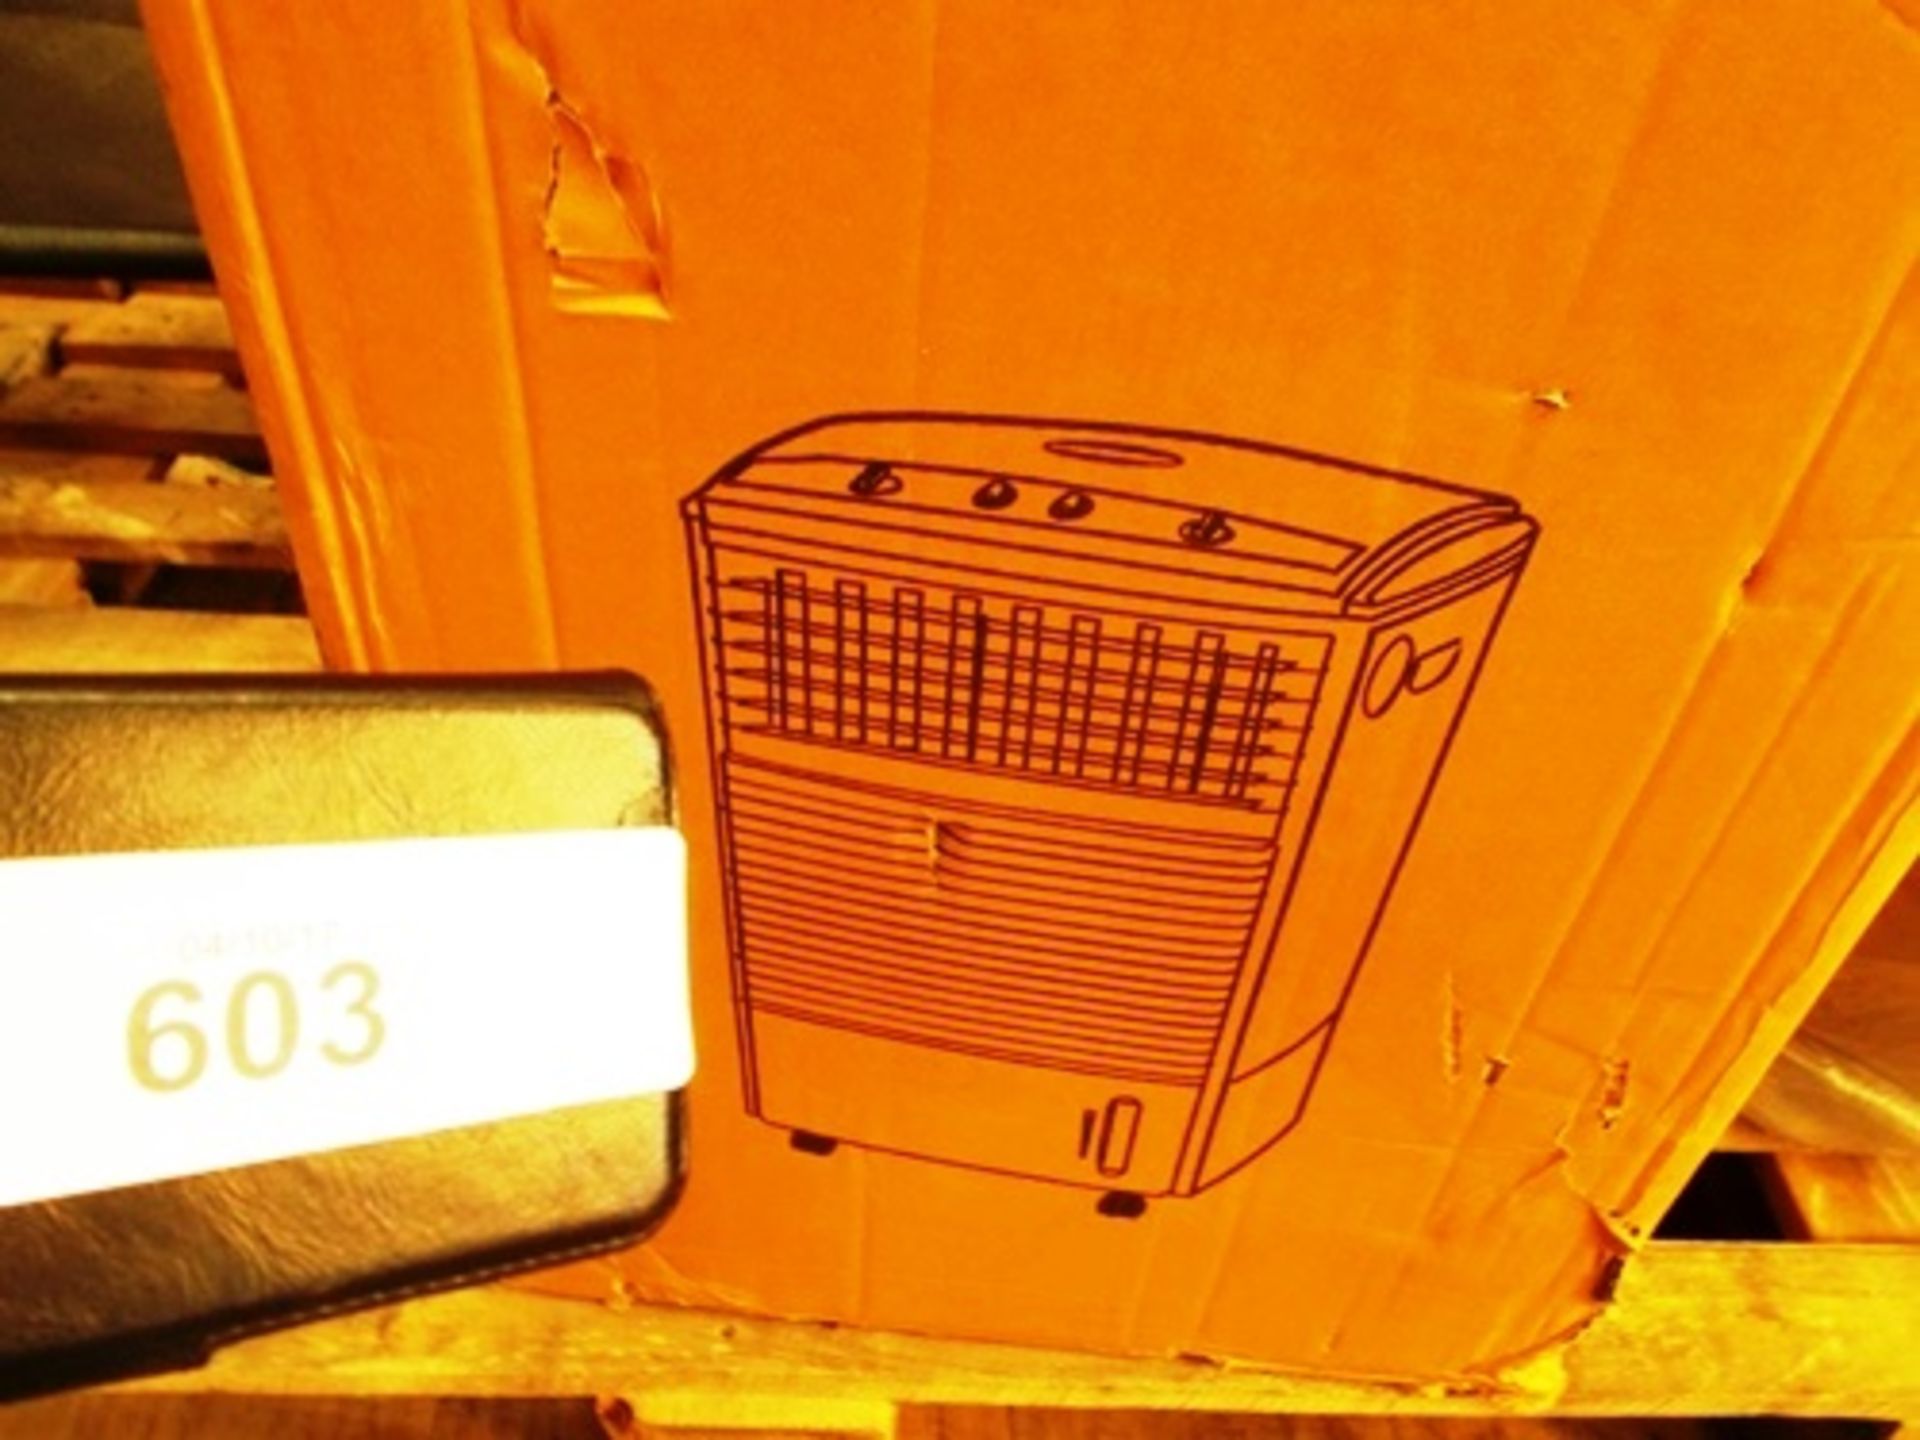 Groundlevel.co.uk air cooler, model HOAIR60 - New in box, box open (Pallet4)